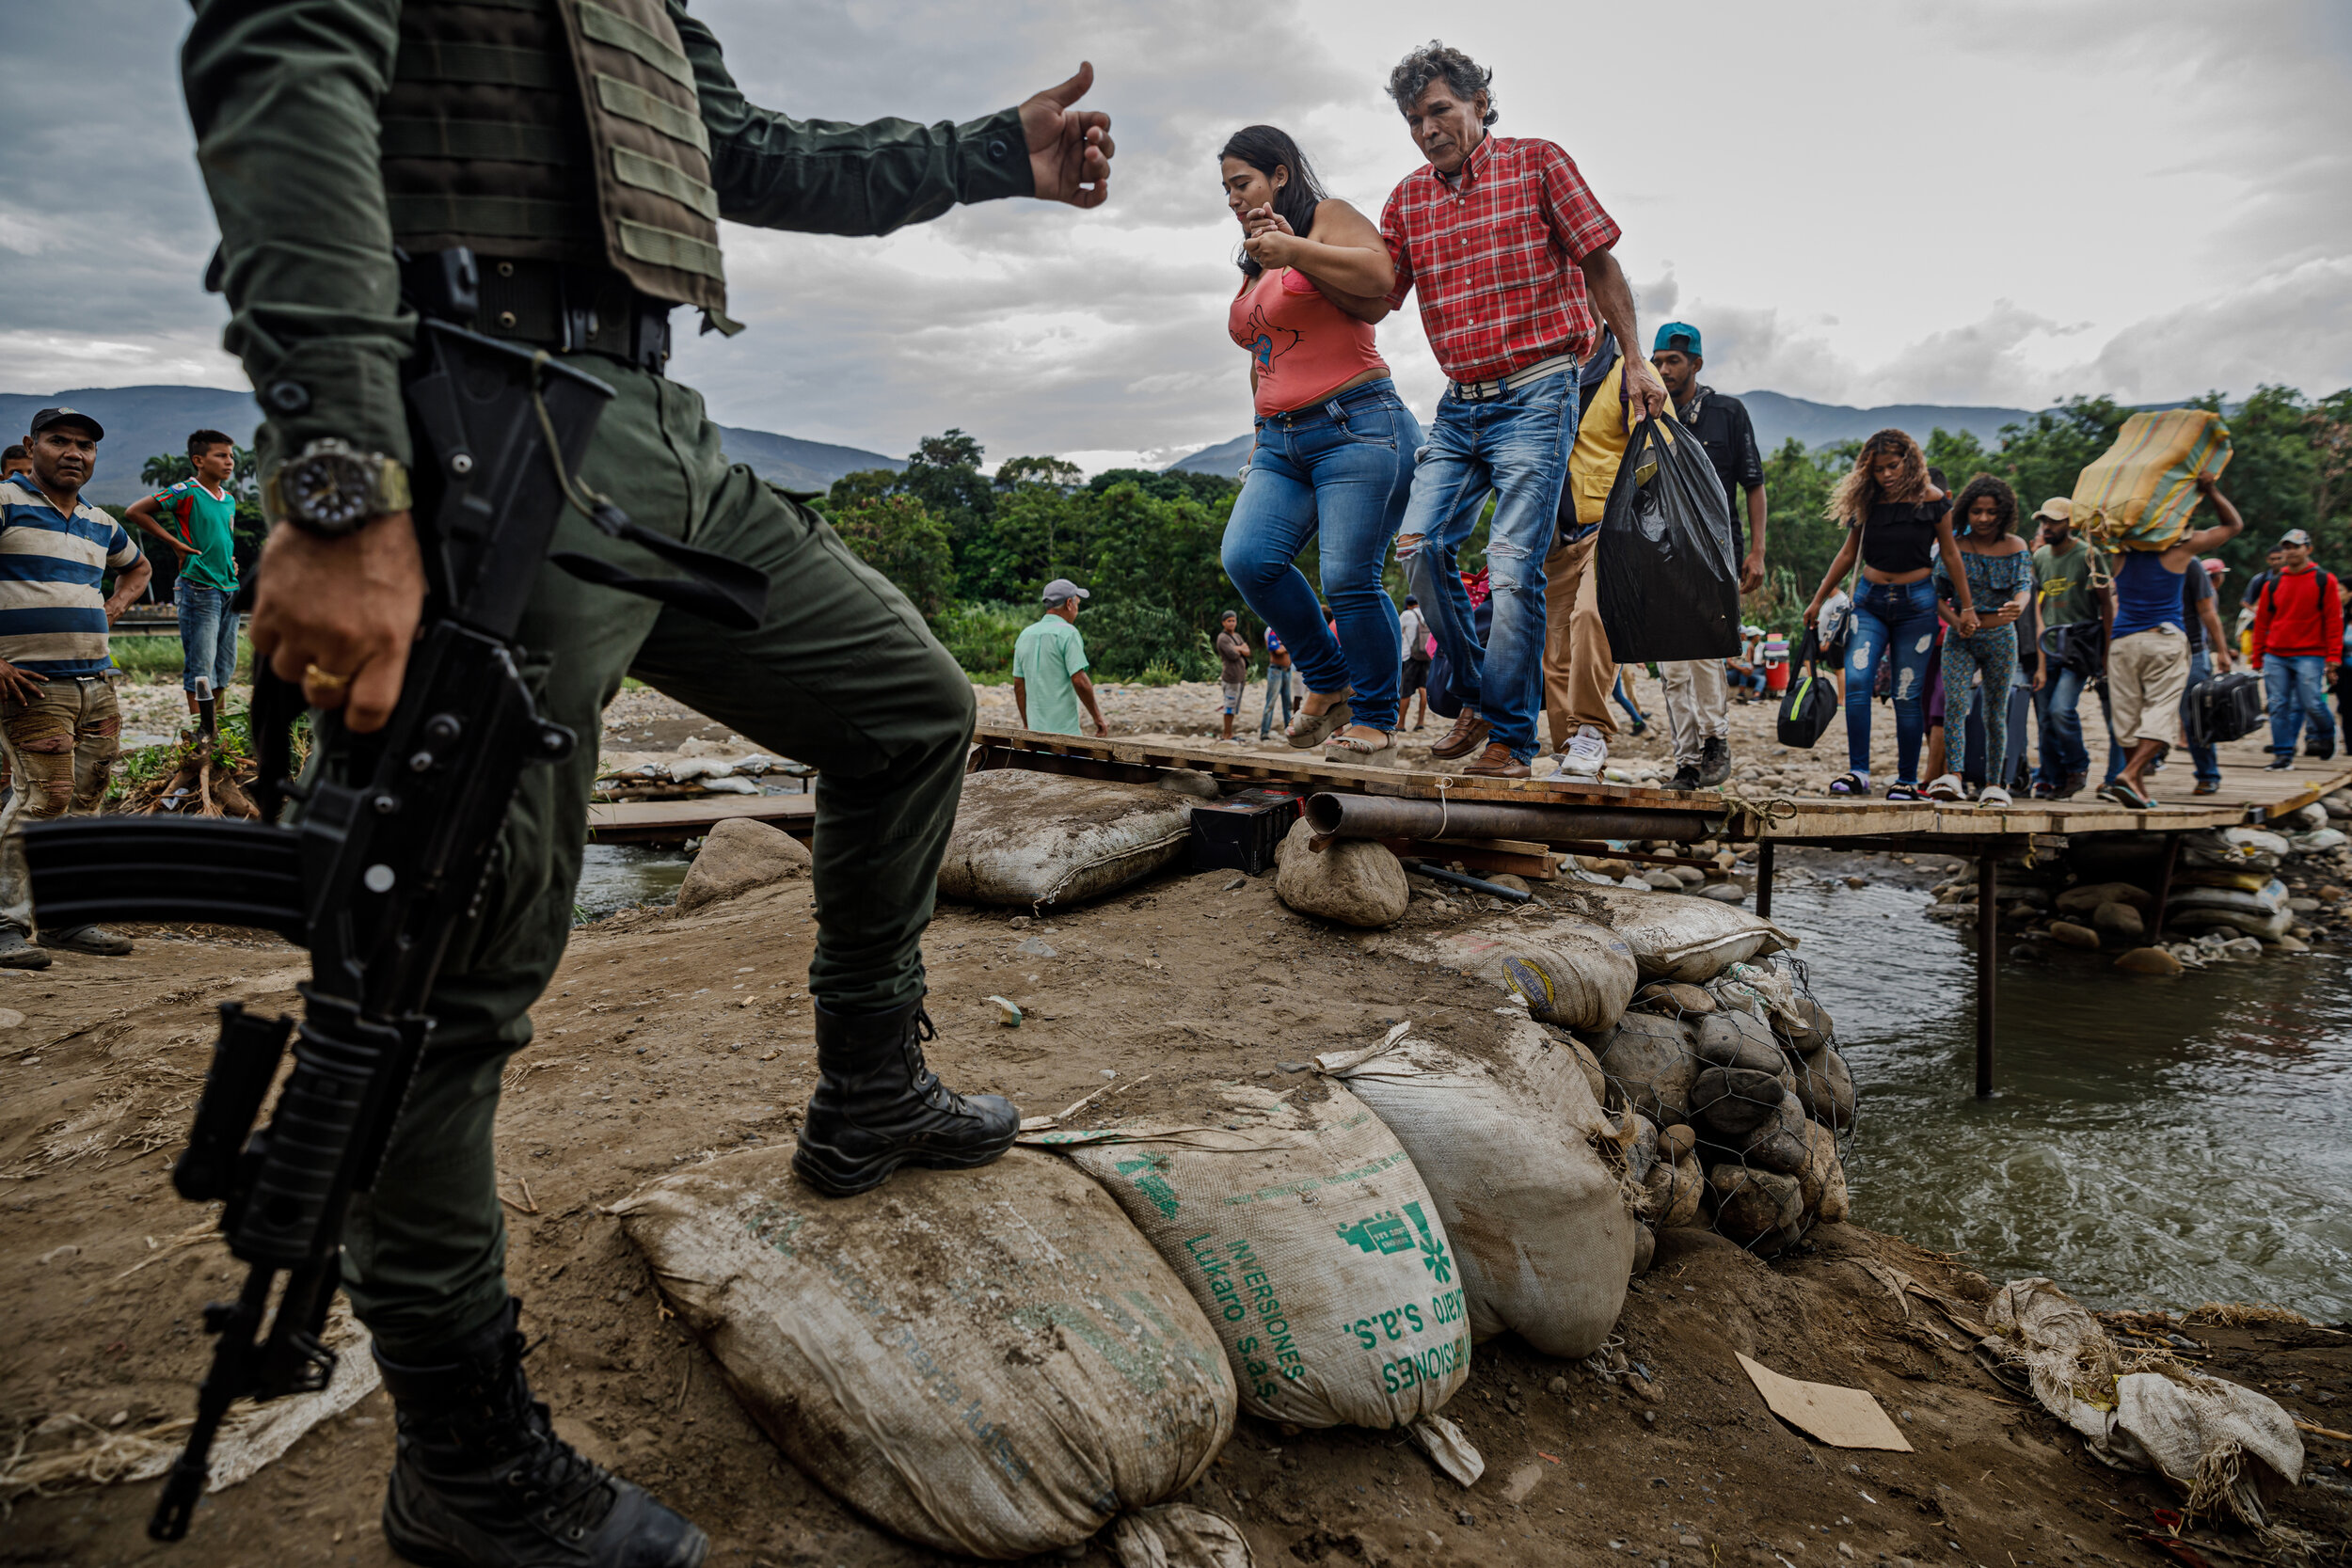  Colombian Police guarding the Colombia-Venezuela border stand guard as Venezuelan migrants rush to cross the border from San Antonio del Tchira in Venezuela to Colombia through "trochas," illegal paths, which are often controlled by the Òcolectivos,